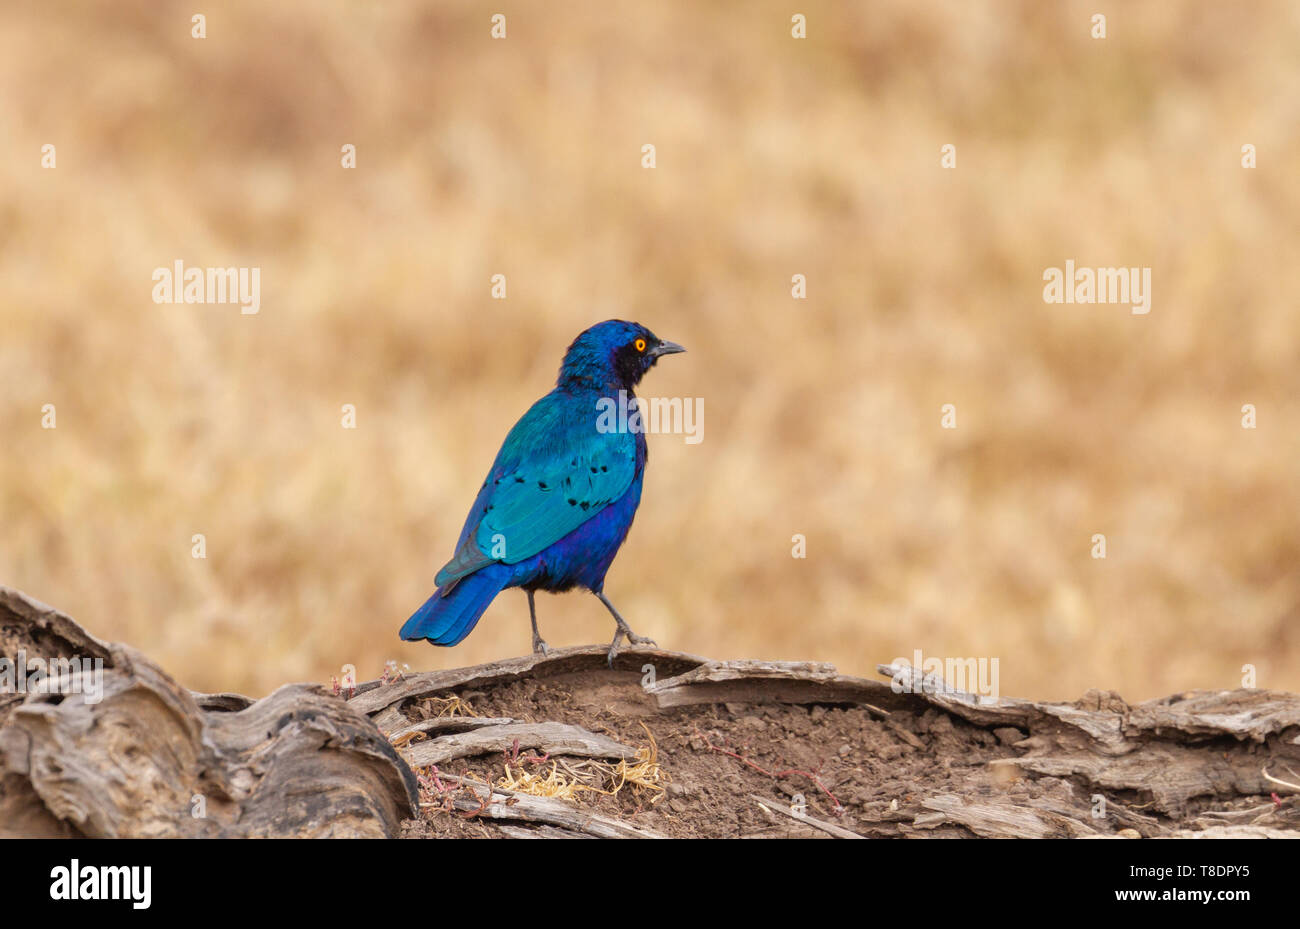 Greater blue-eared starling Lamprotornis chalybaeus blue green bird perched on wood looking over blurred golden grass Ol Pejeta Conservancy Kenya East Stock Photo